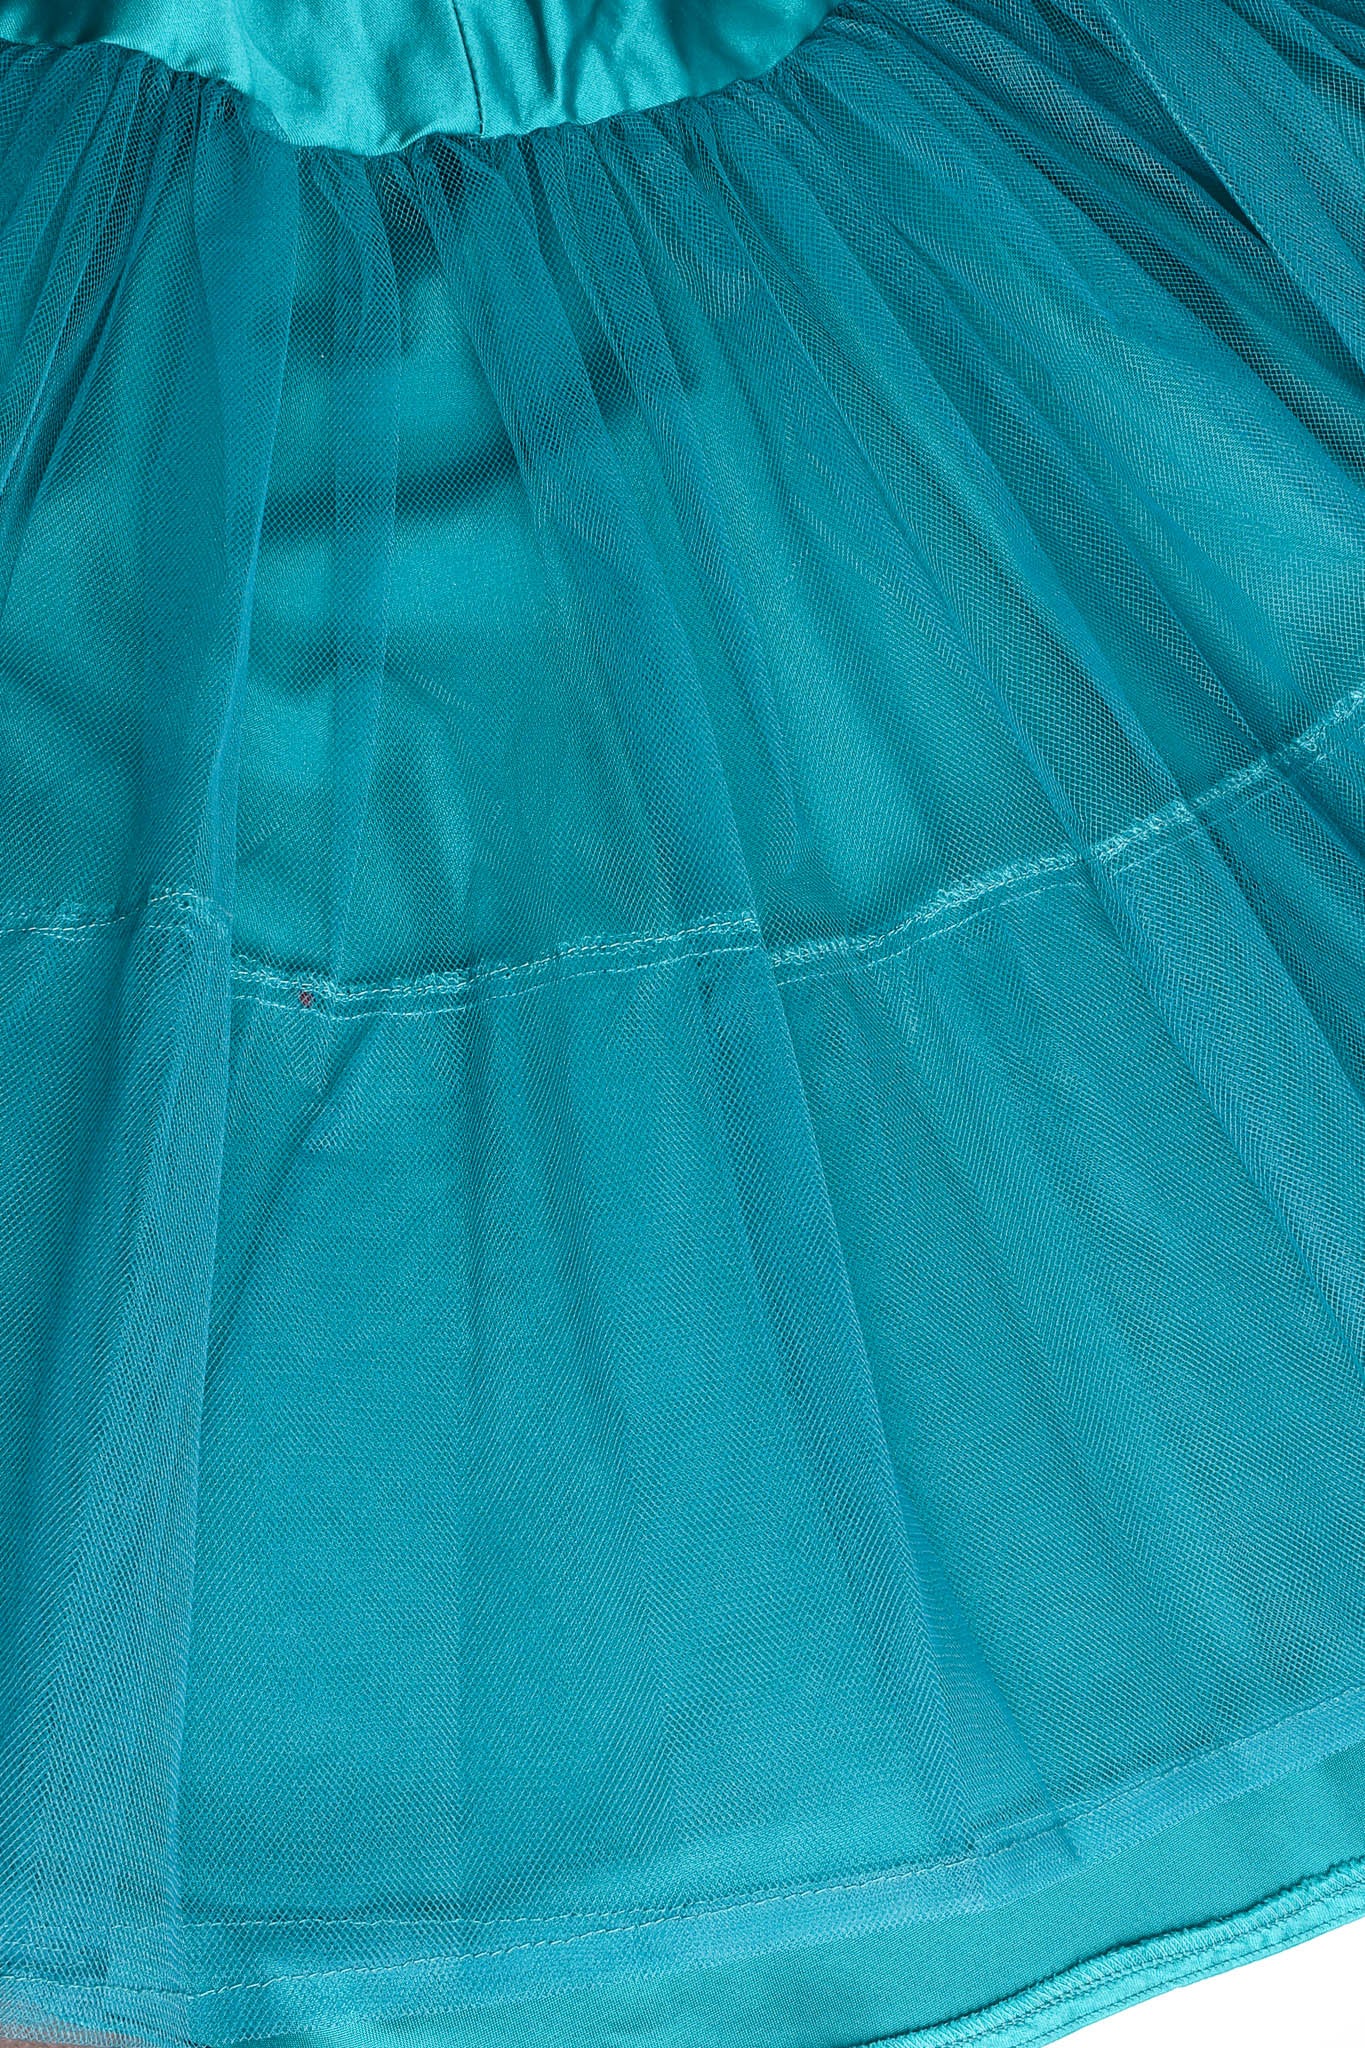 Vintage Victor Costa Satin Sheen Tulle Circle Skirt tulle @ Recess Los Angeles